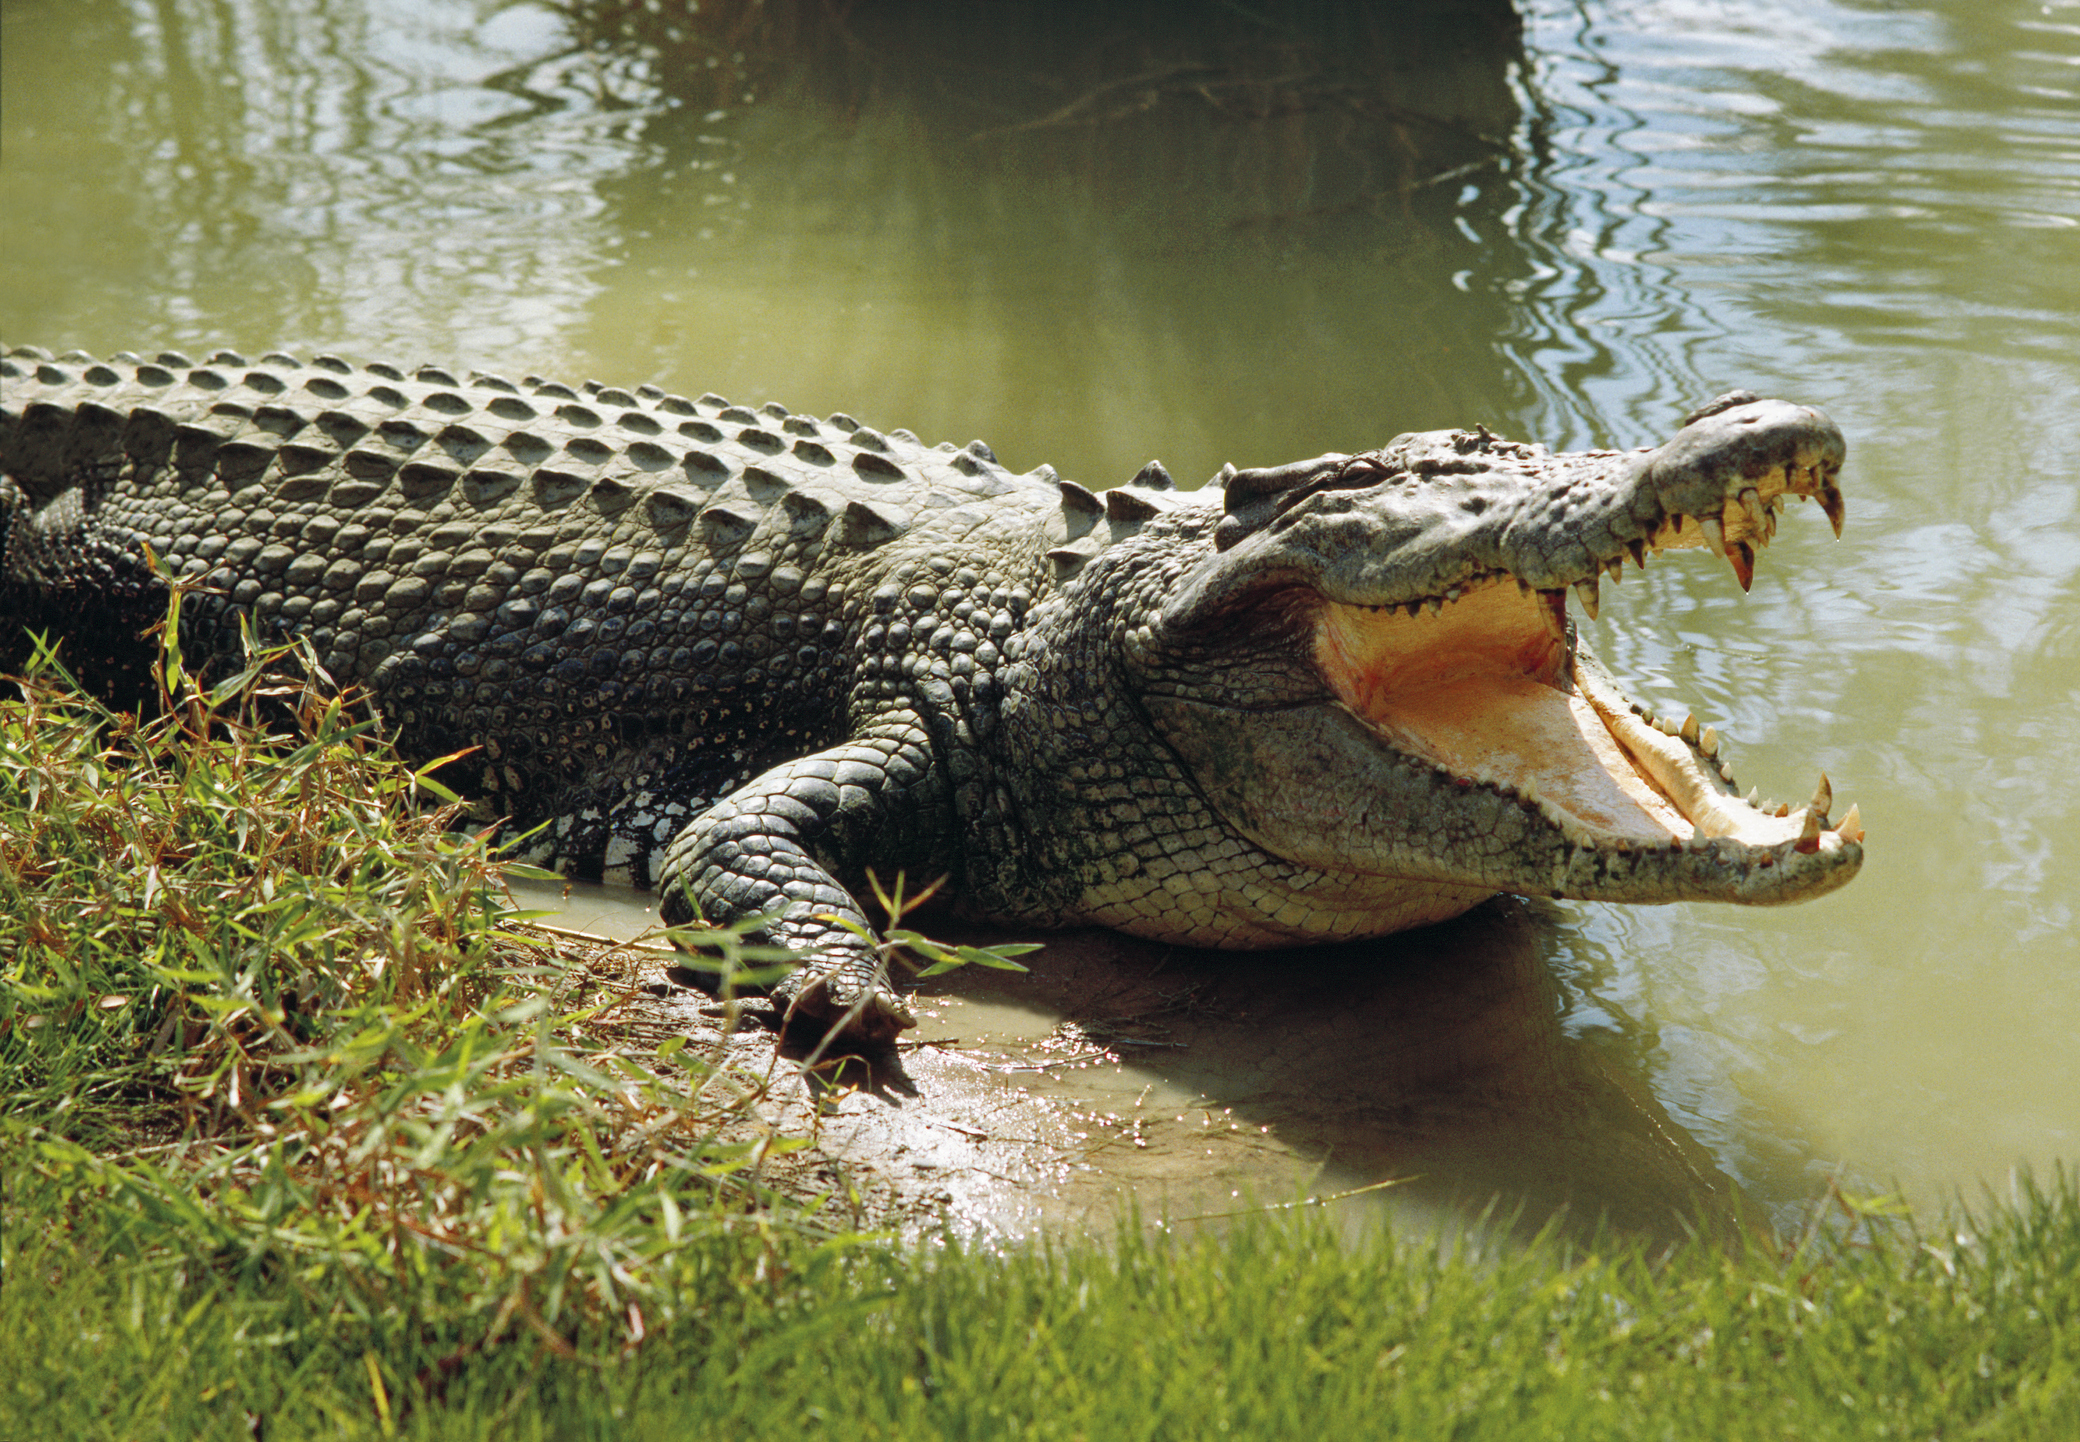 Saltwater crocodile guide: diet and where they live in the wild